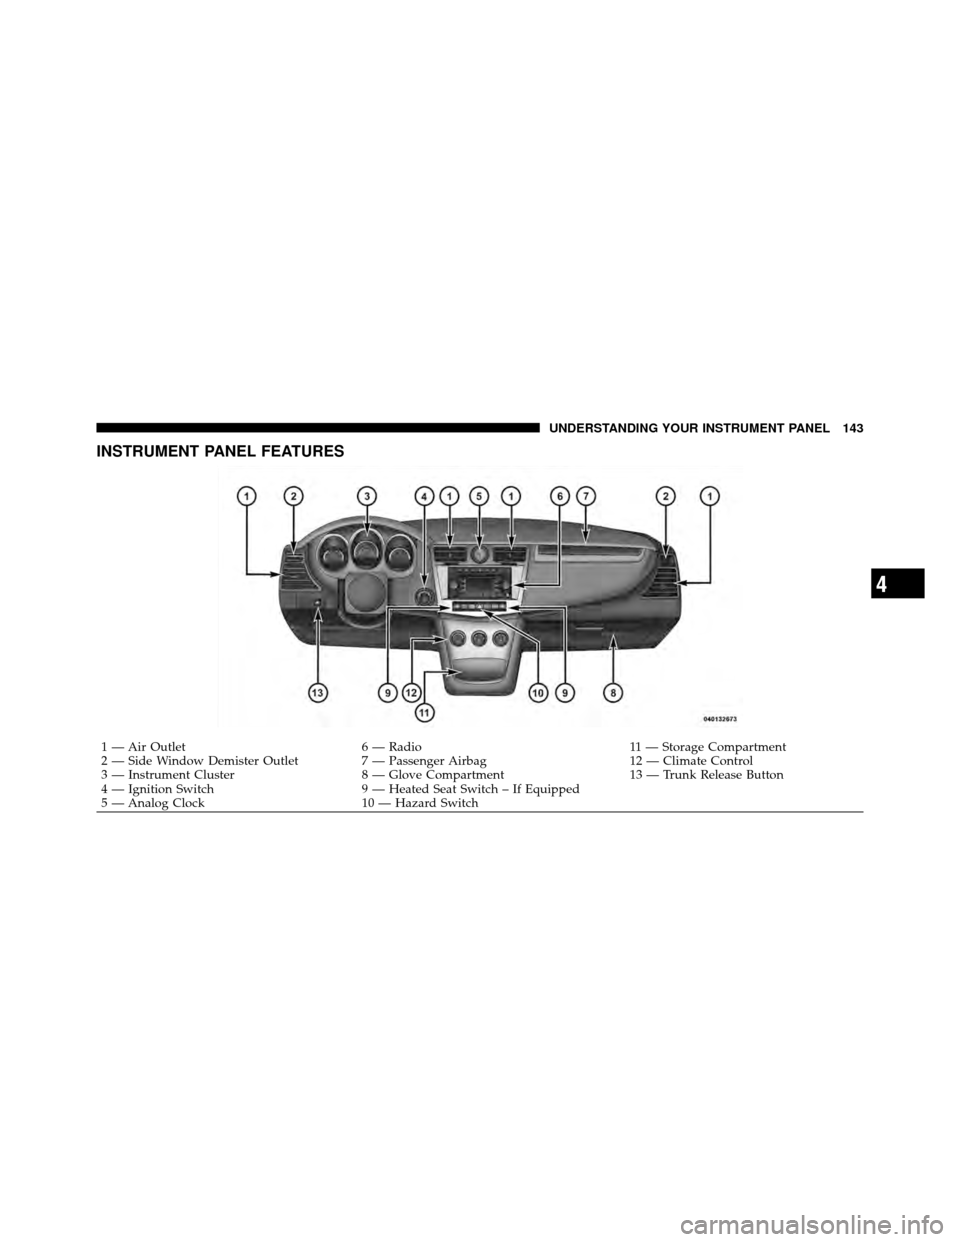 CHRYSLER SEBRING 2010 3.G Owners Manual INSTRUMENT PANEL FEATURES
1 — Air Outlet6 — Radio 11 — Storage Compartment
2 — Side Window Demister Outlet 7 — Passenger Airbag 12 — Climate Control
3 — Instrument Cluster 8 — Glove Co